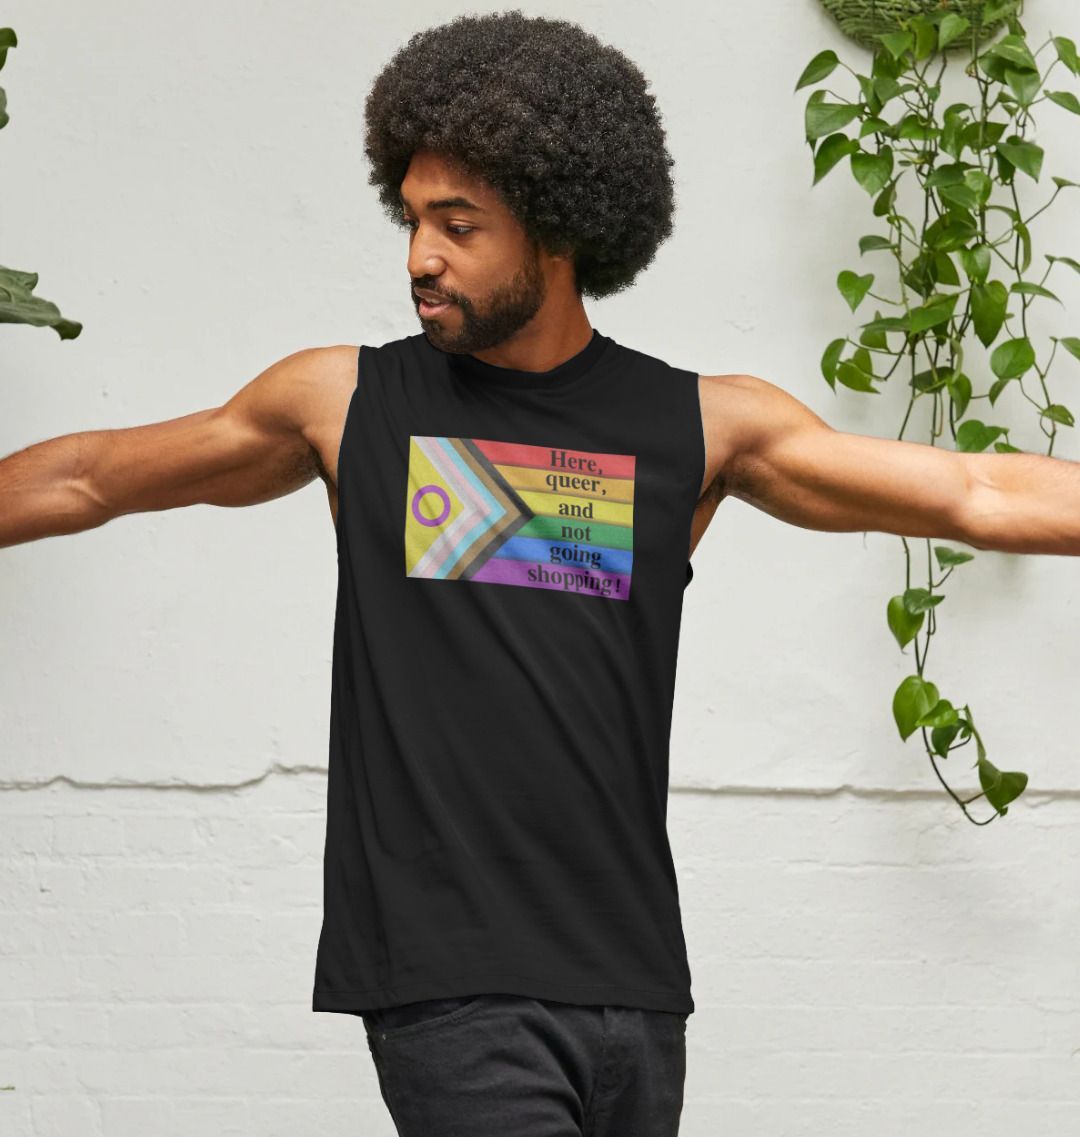 Here, queer and not going shopping unisex vest